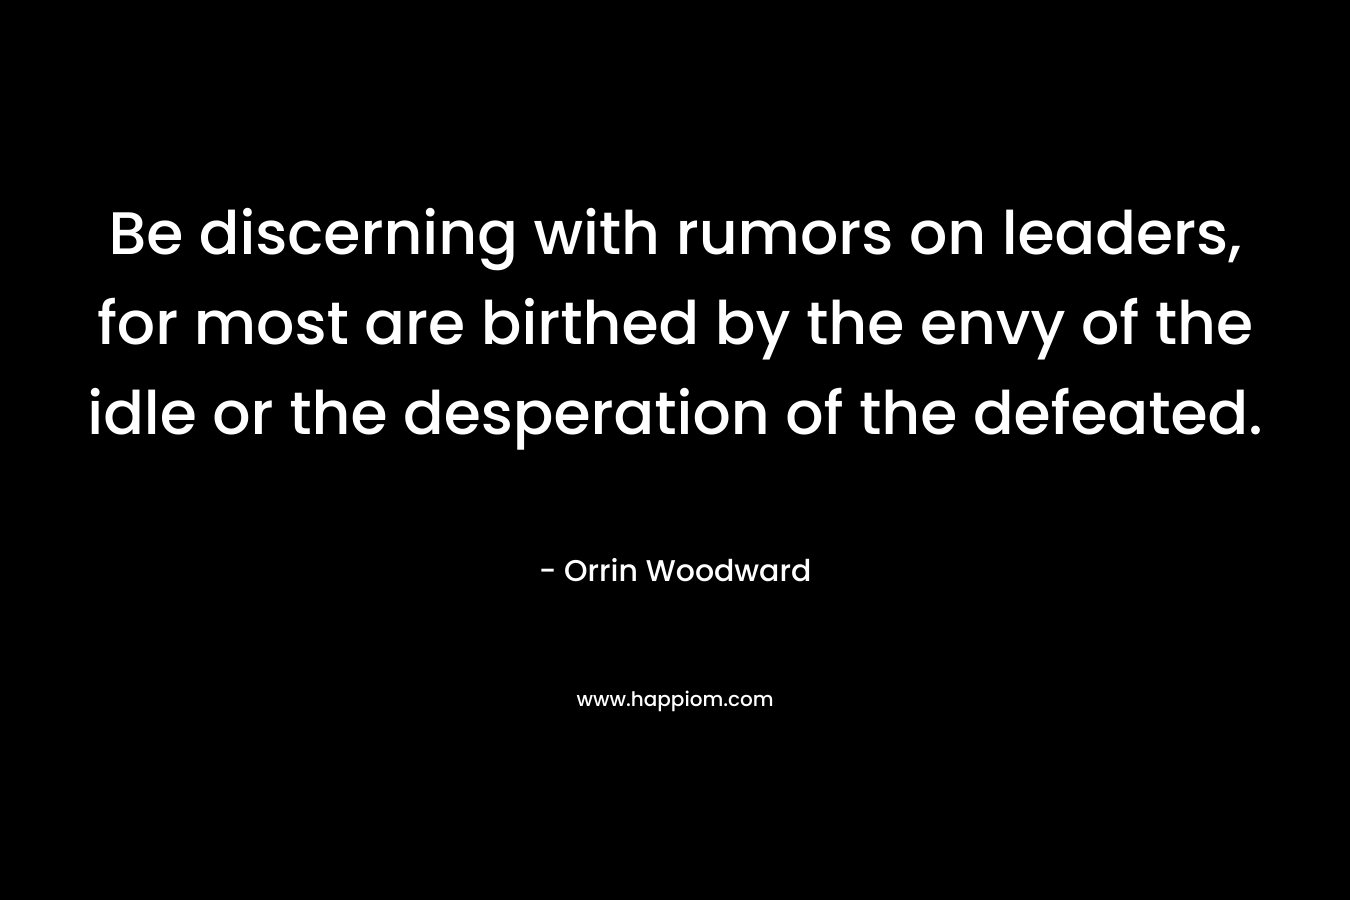 Be discerning with rumors on leaders, for most are birthed by the envy of the idle or the desperation of the defeated.